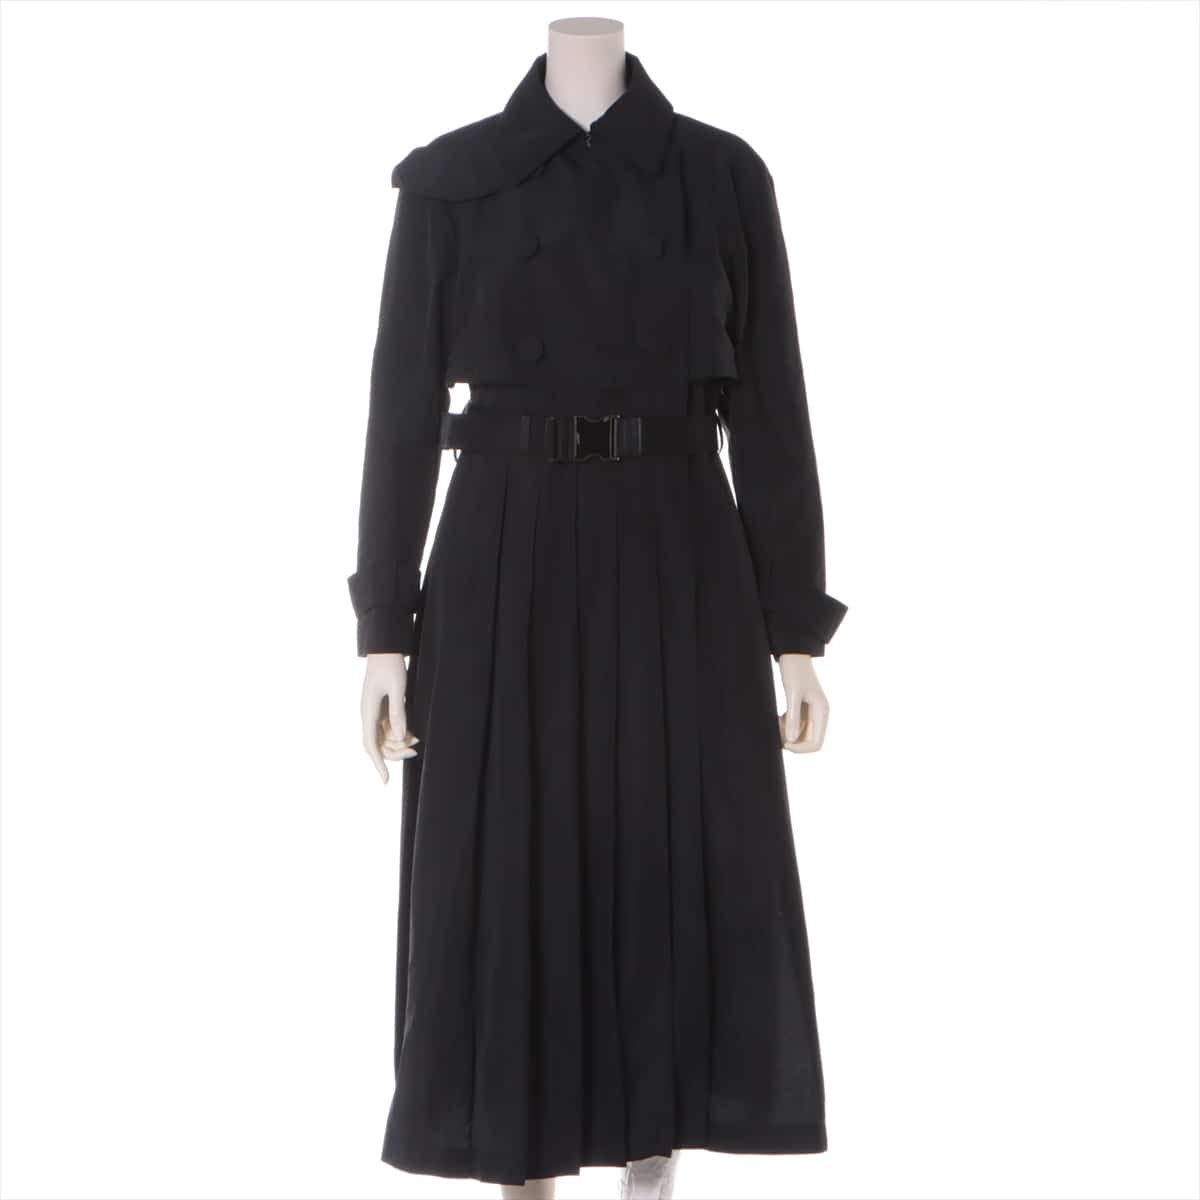 Fendi 18 years Cotton & Polyester coats 38 Ladies' Black  belted